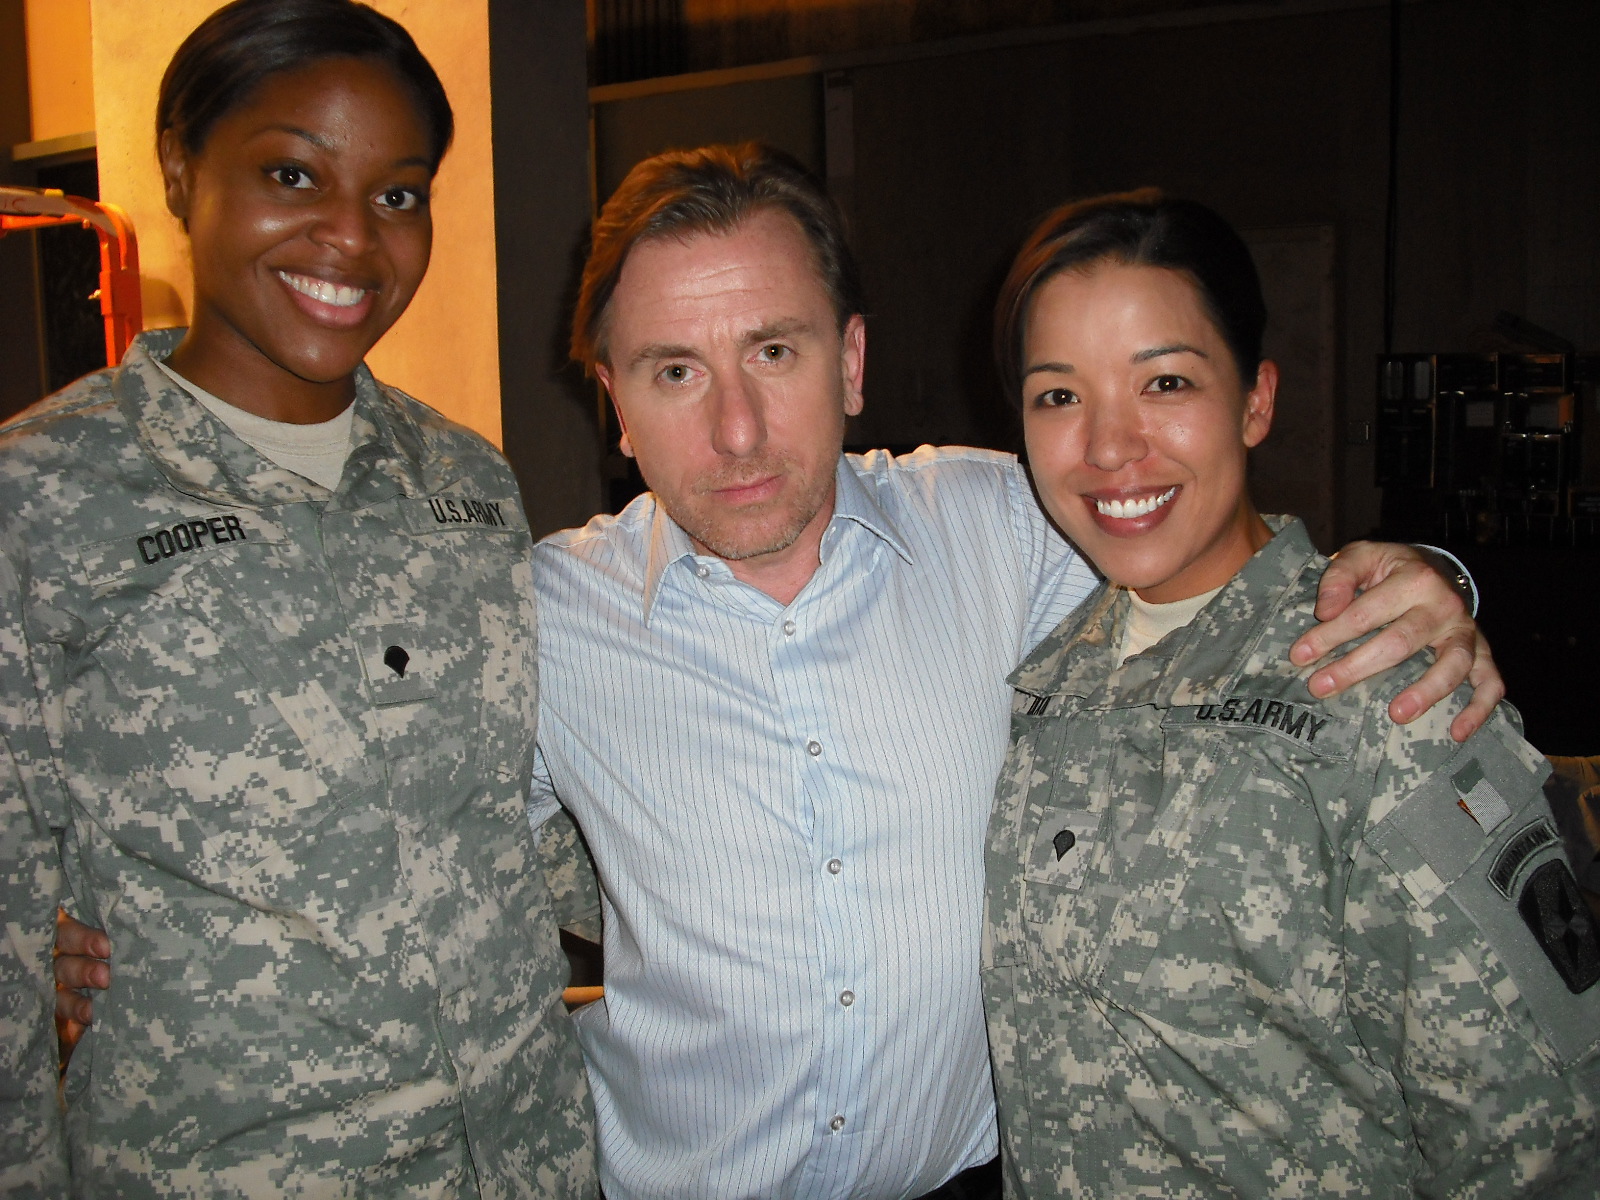 Nicole Pettis, Tim Roth, Lydia Castro on the set of LIE TO ME.